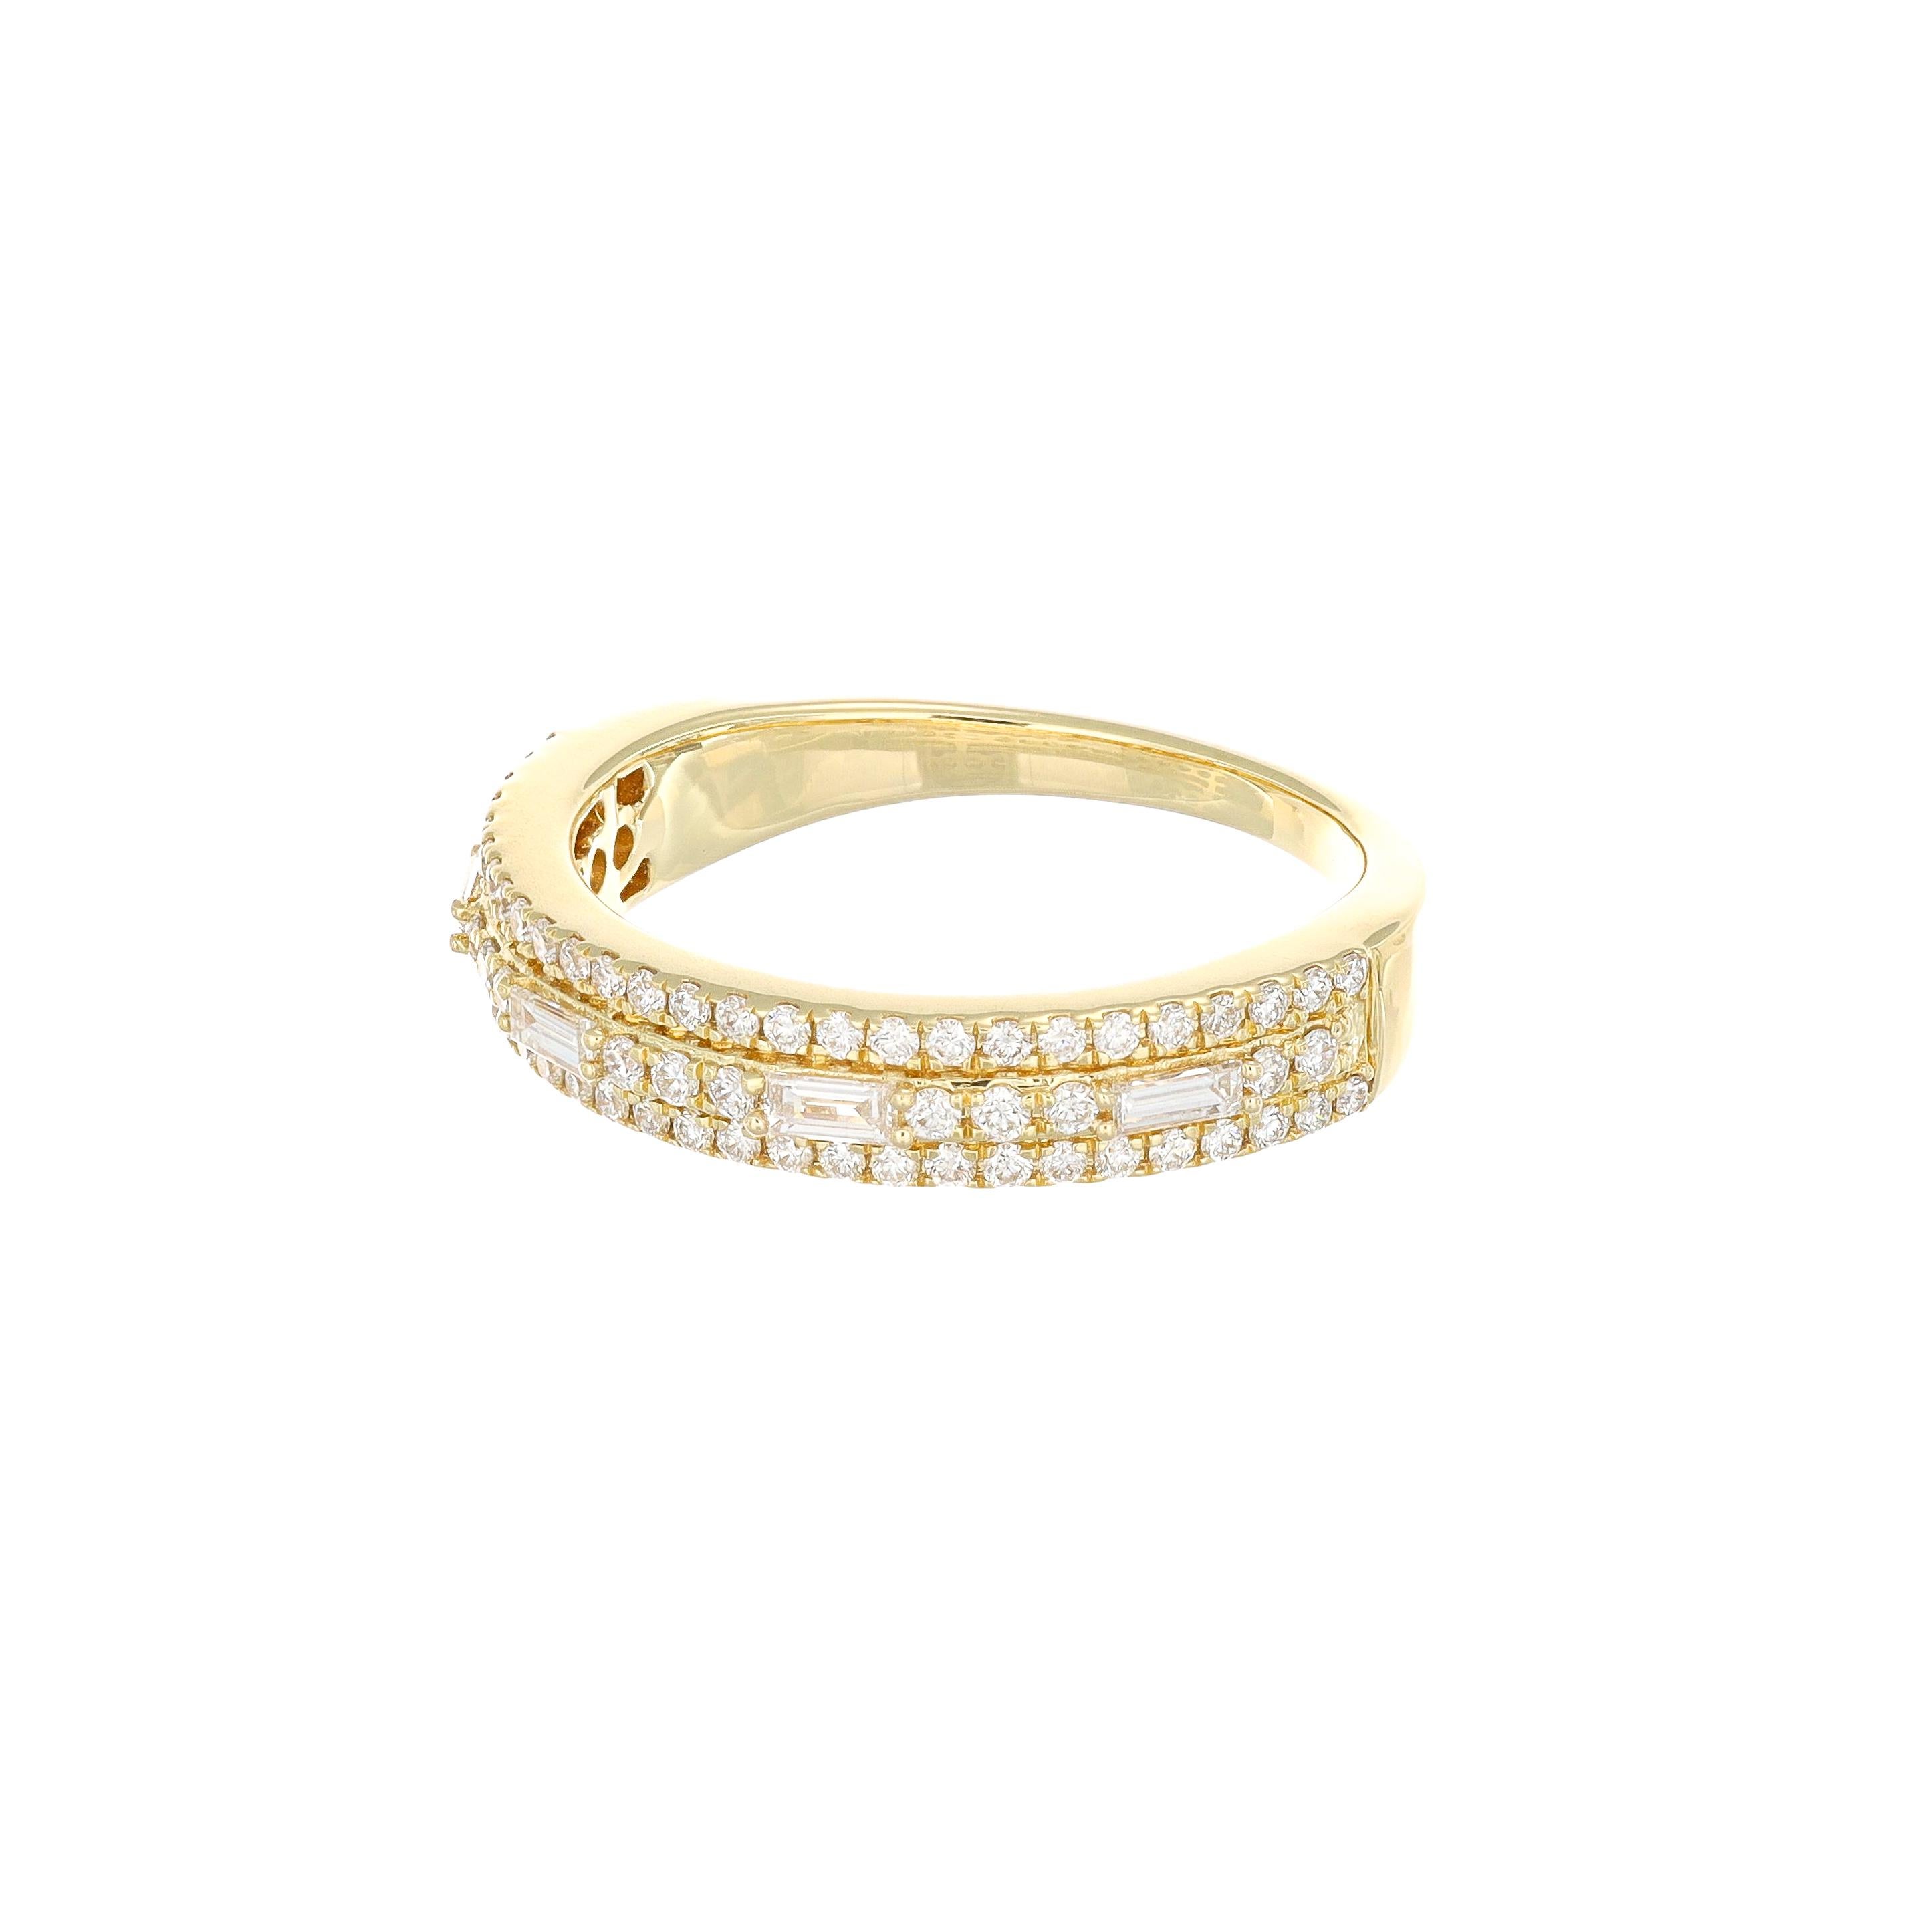 Crafted with meticulous attention to detail and unparalleled craftsmanship, this 18 KT Yellow Gold band is adorned with a total of 0.51 carats of dazzling diamonds, making it the perfect choice for your upcoming anniversary or wedding